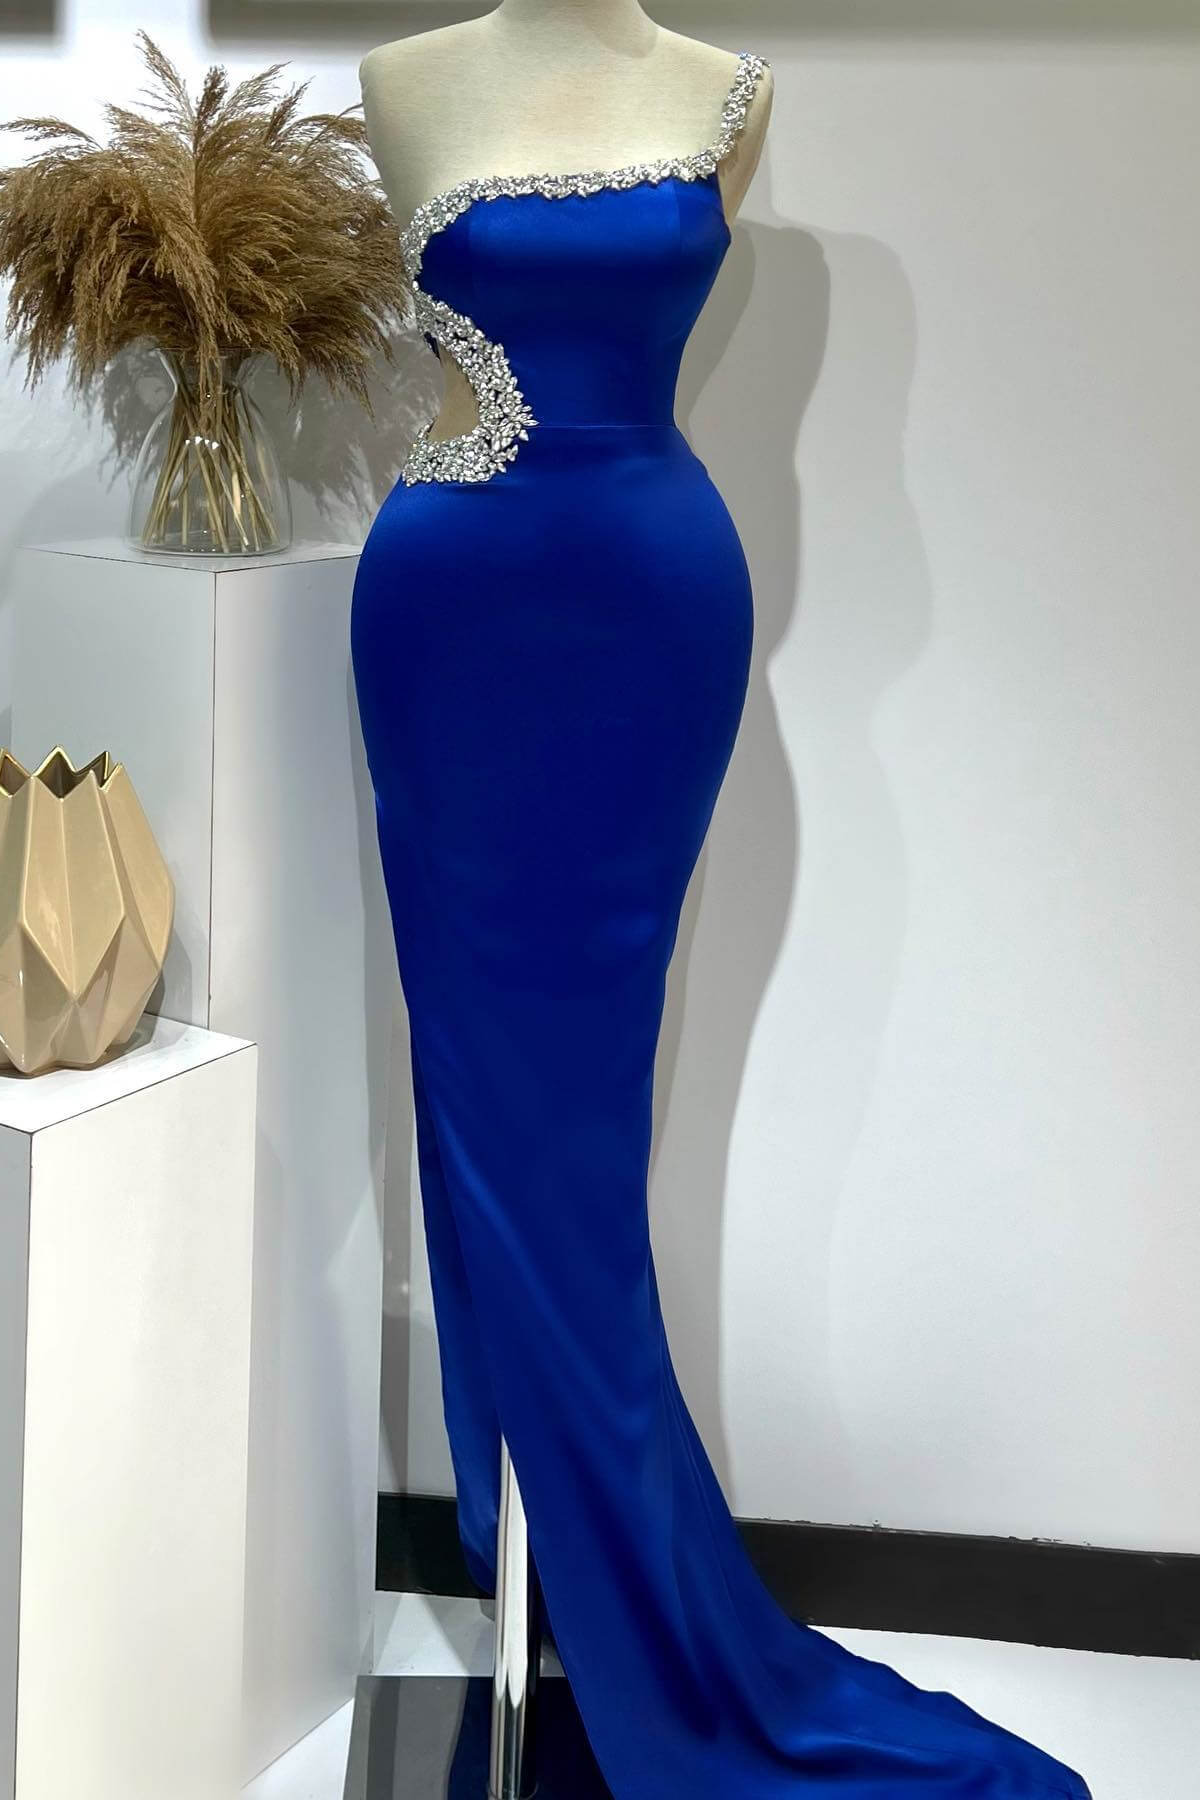 Chic Royal Blue One Shoulder Sleeveless Mermaid Evening Gown With Crystals - lulusllly